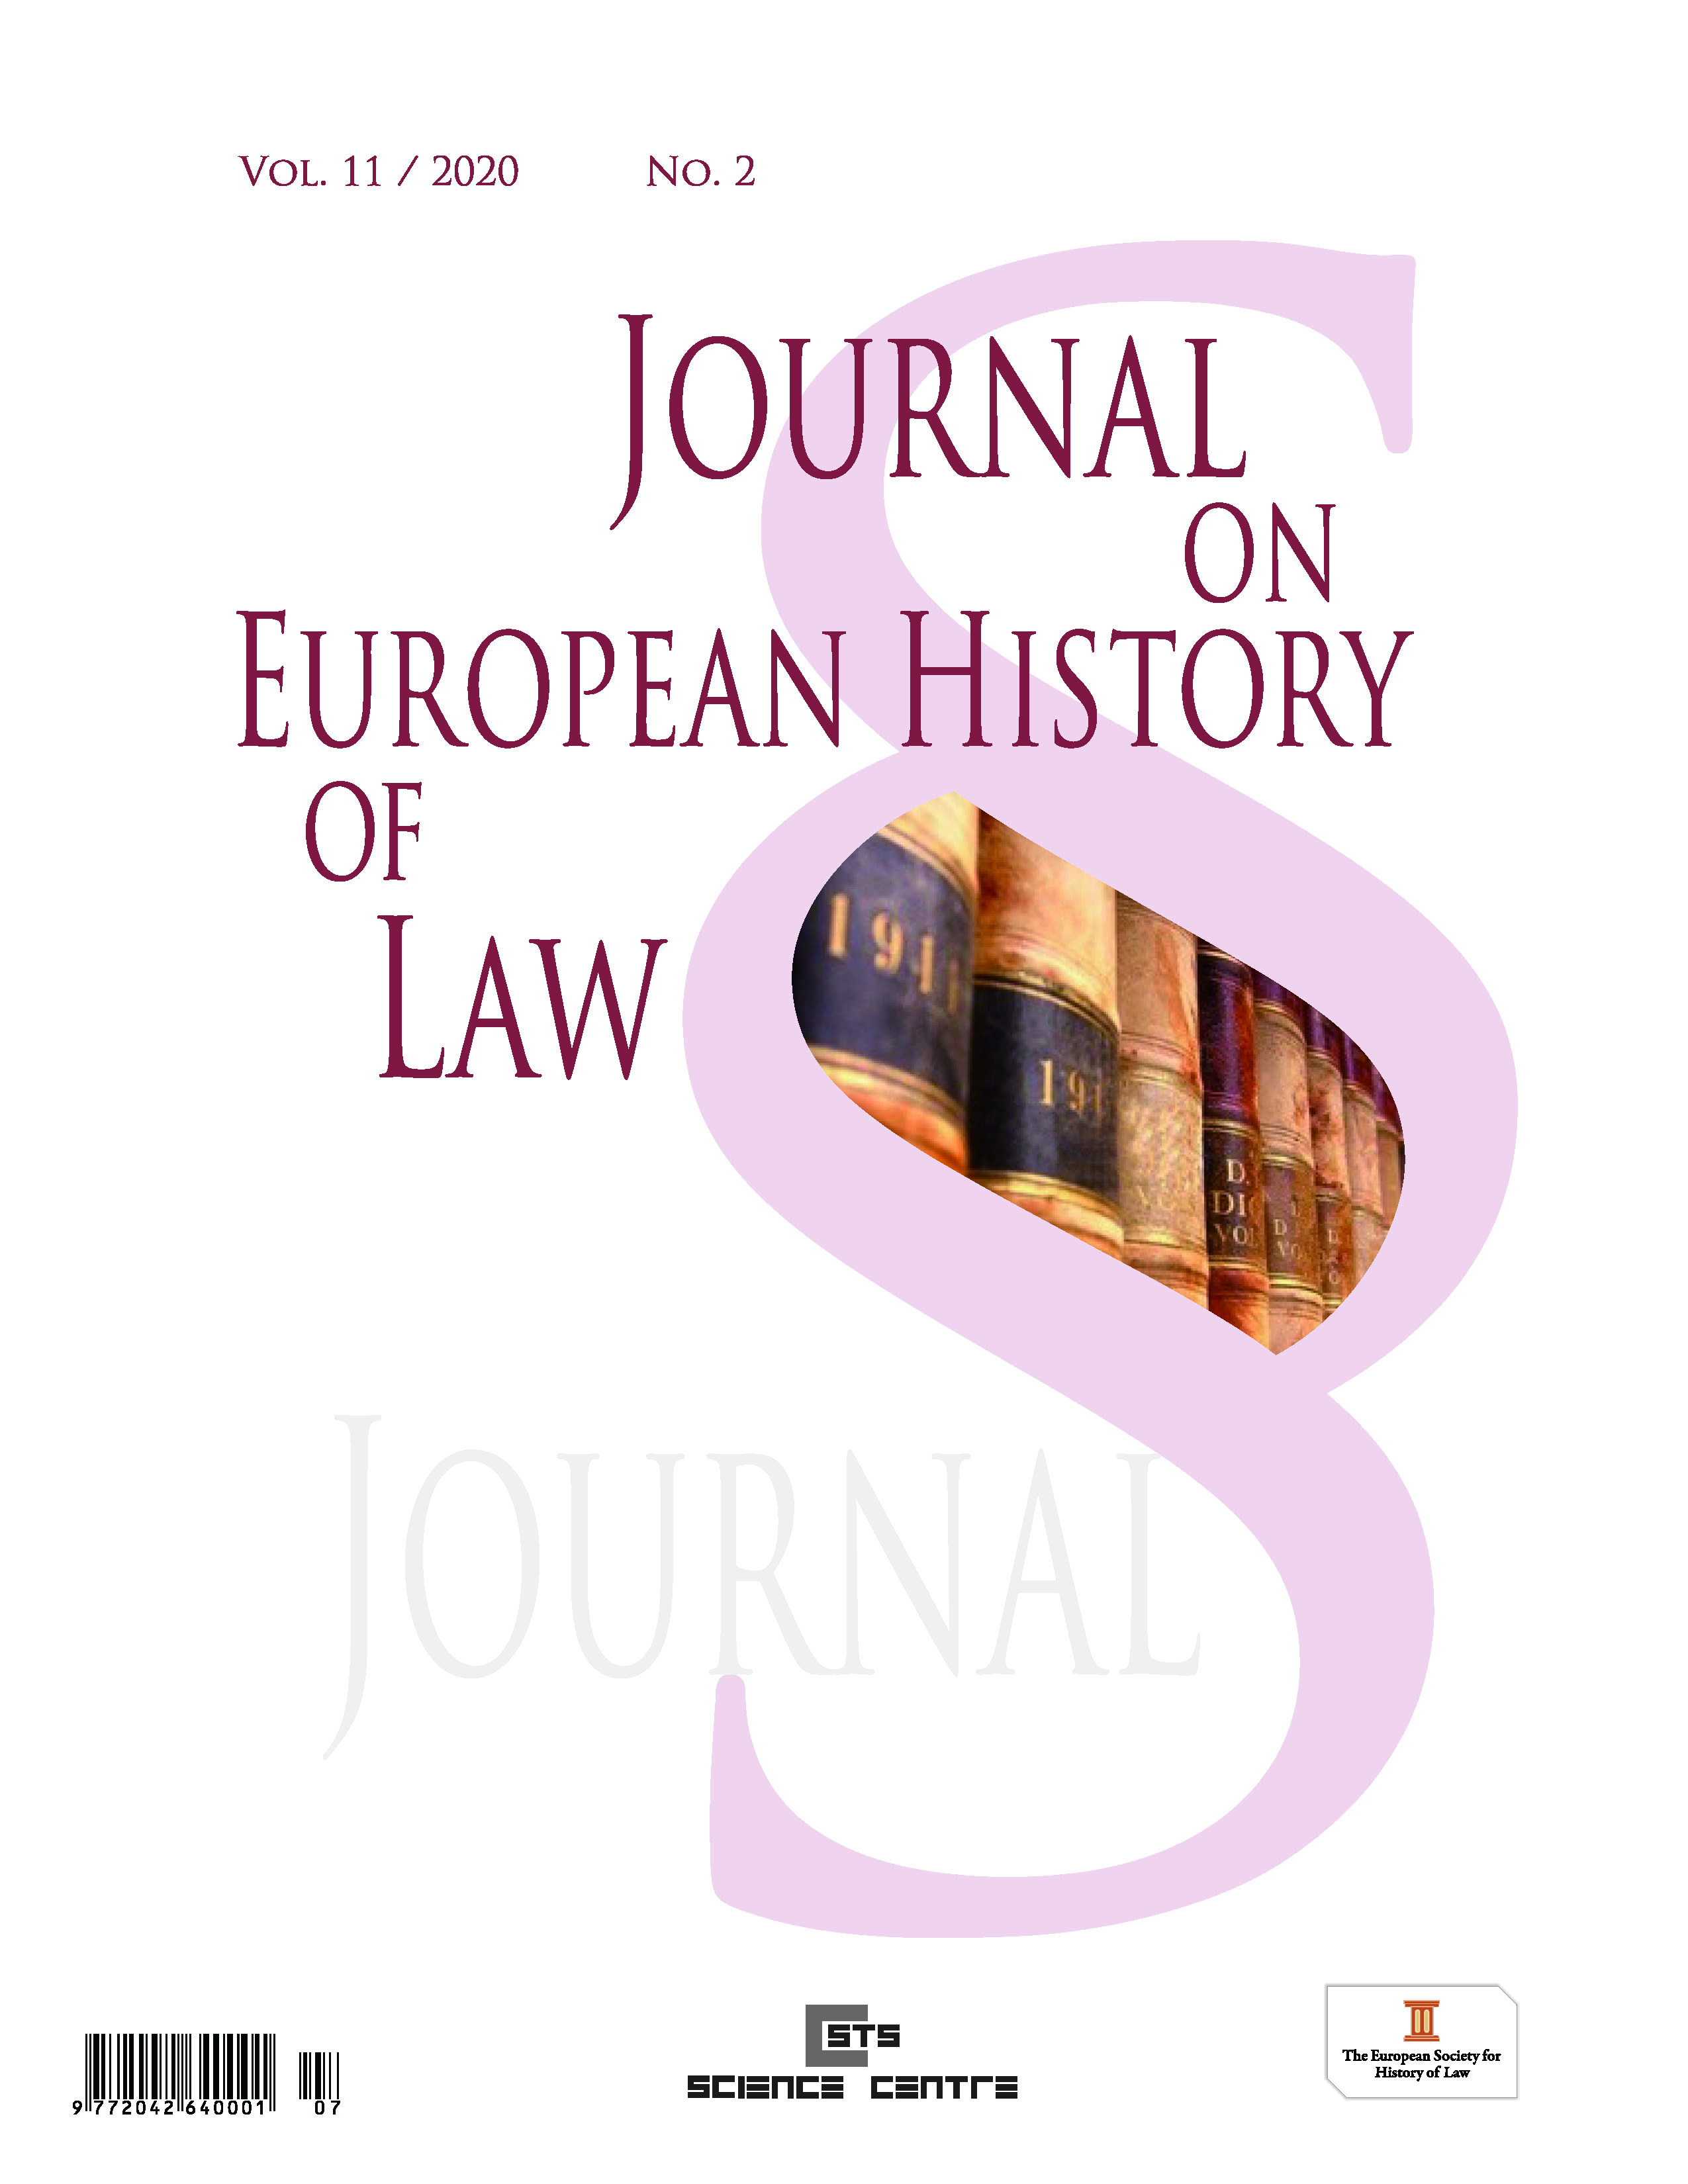 The Development of Modern Budgetary Law in the European Legal Culture